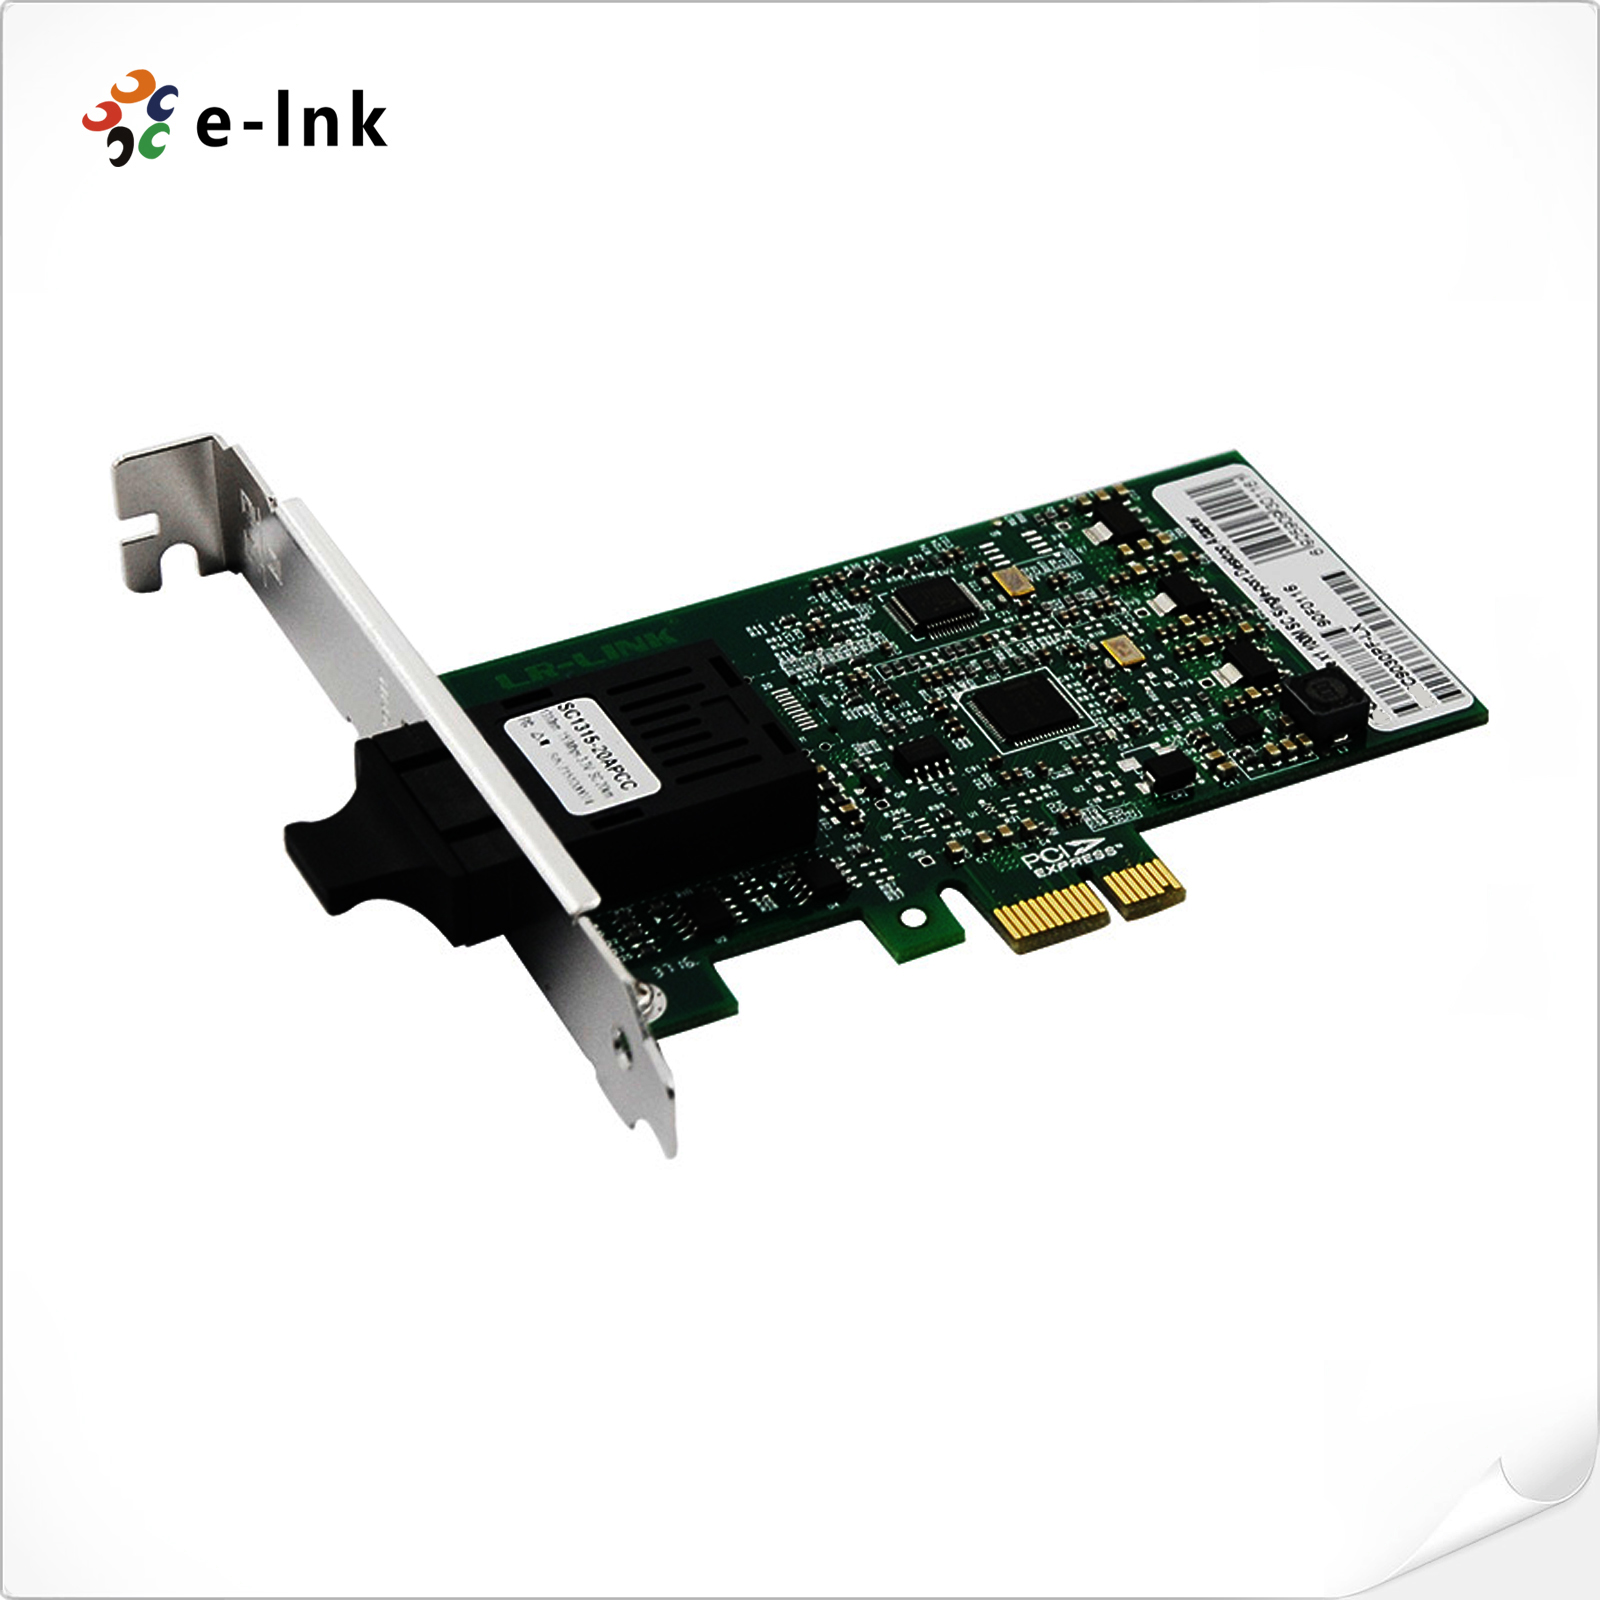 Fast Ethernet Fiber PCI-Express Network Adapters (Intel 82574 Based)